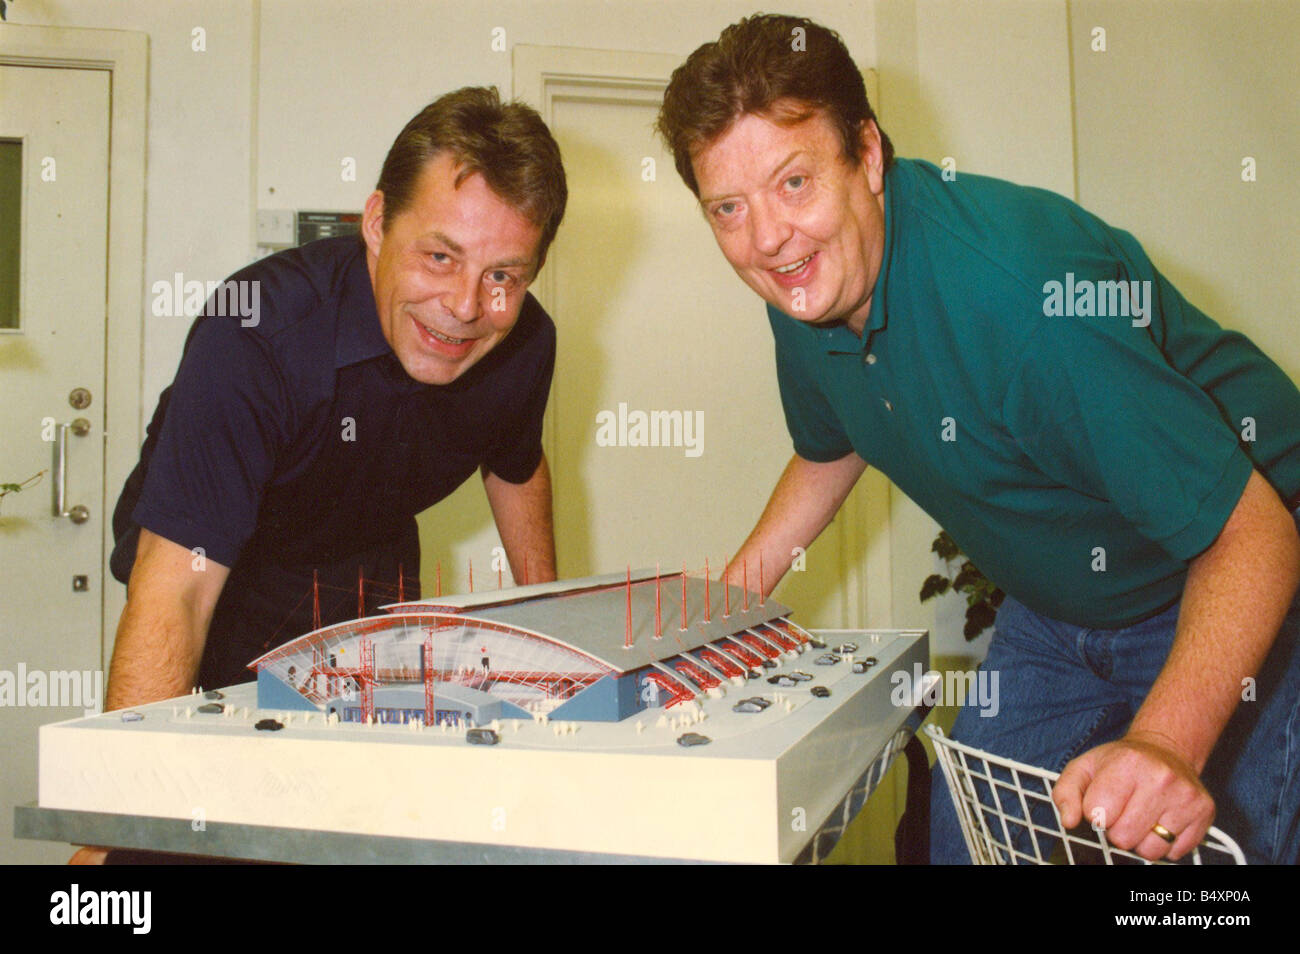 Former bassist of The Animals pop group Chas Chandler right pictured with architect Nigel Stanger talks about the building of the Newcastle Arena 07 08 92 Stock Photo